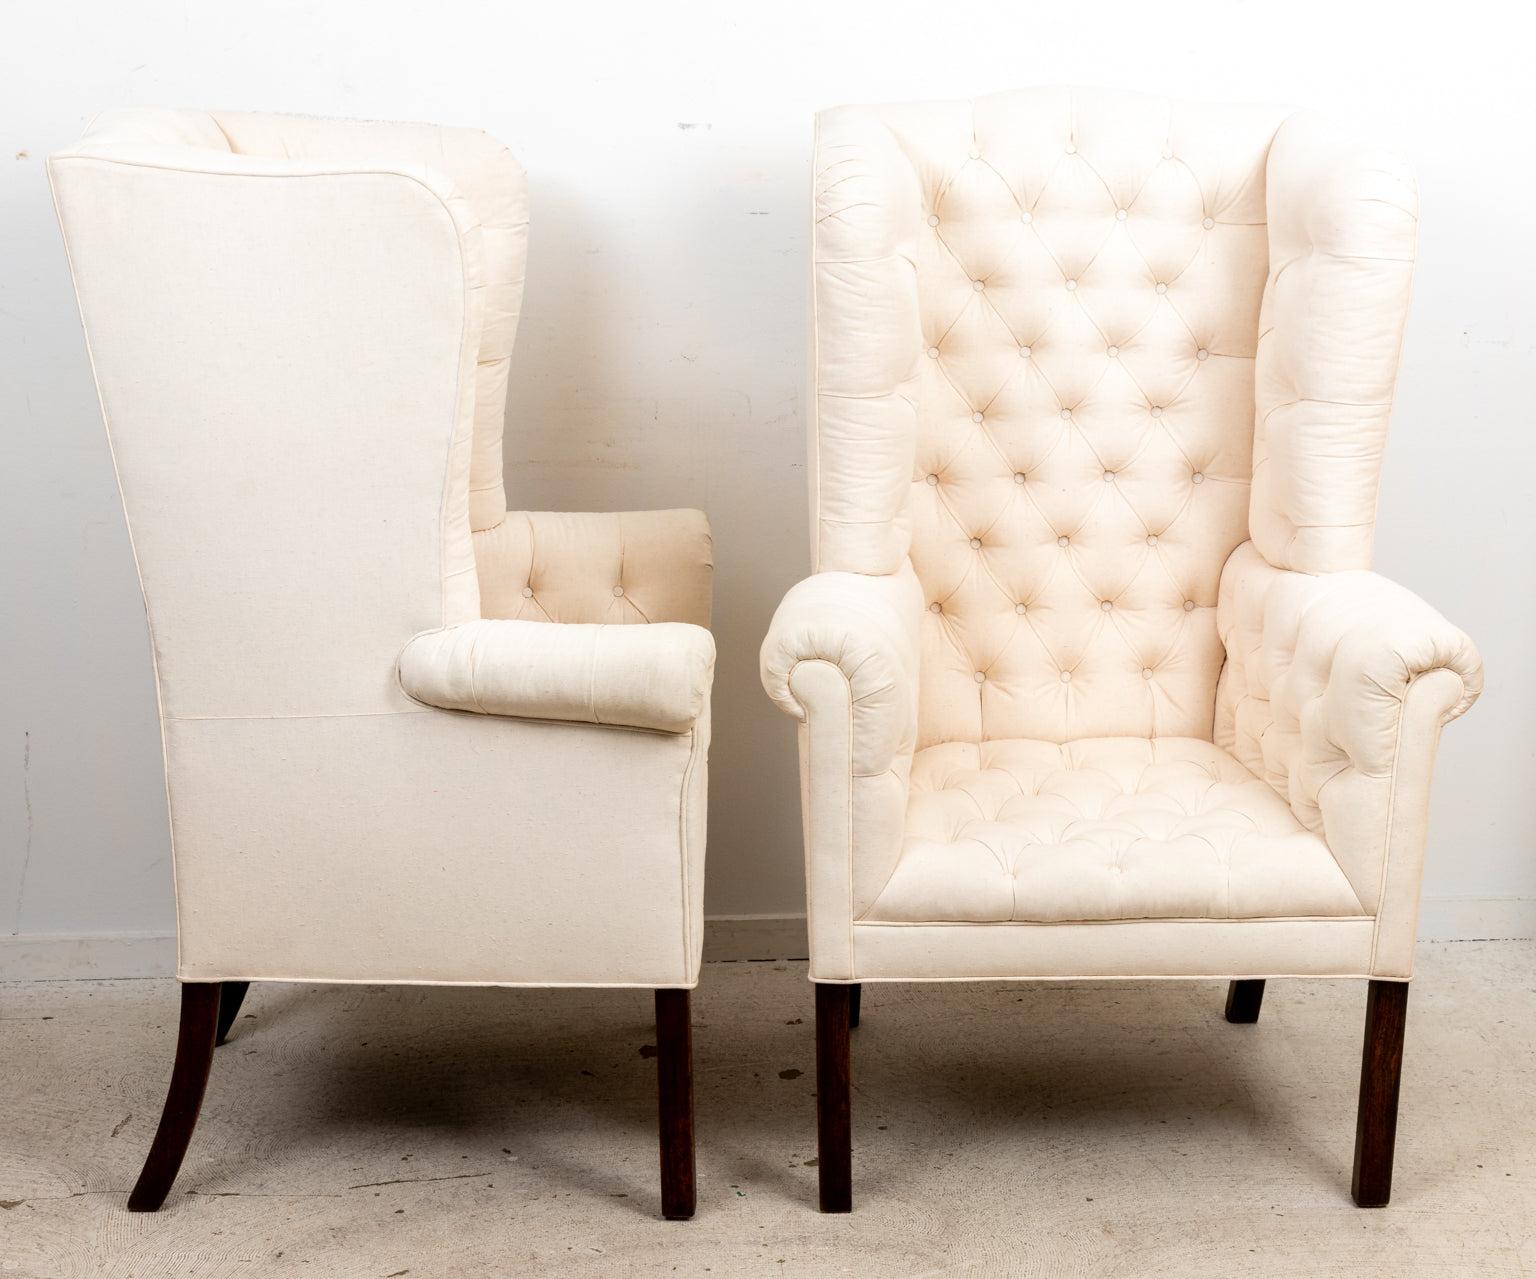 Pair of English tufted Georgian style chairs with horsehair, upholstered in muslin. Legs are mahogany. (Originally done in leather). Please note of wear consistent with age.